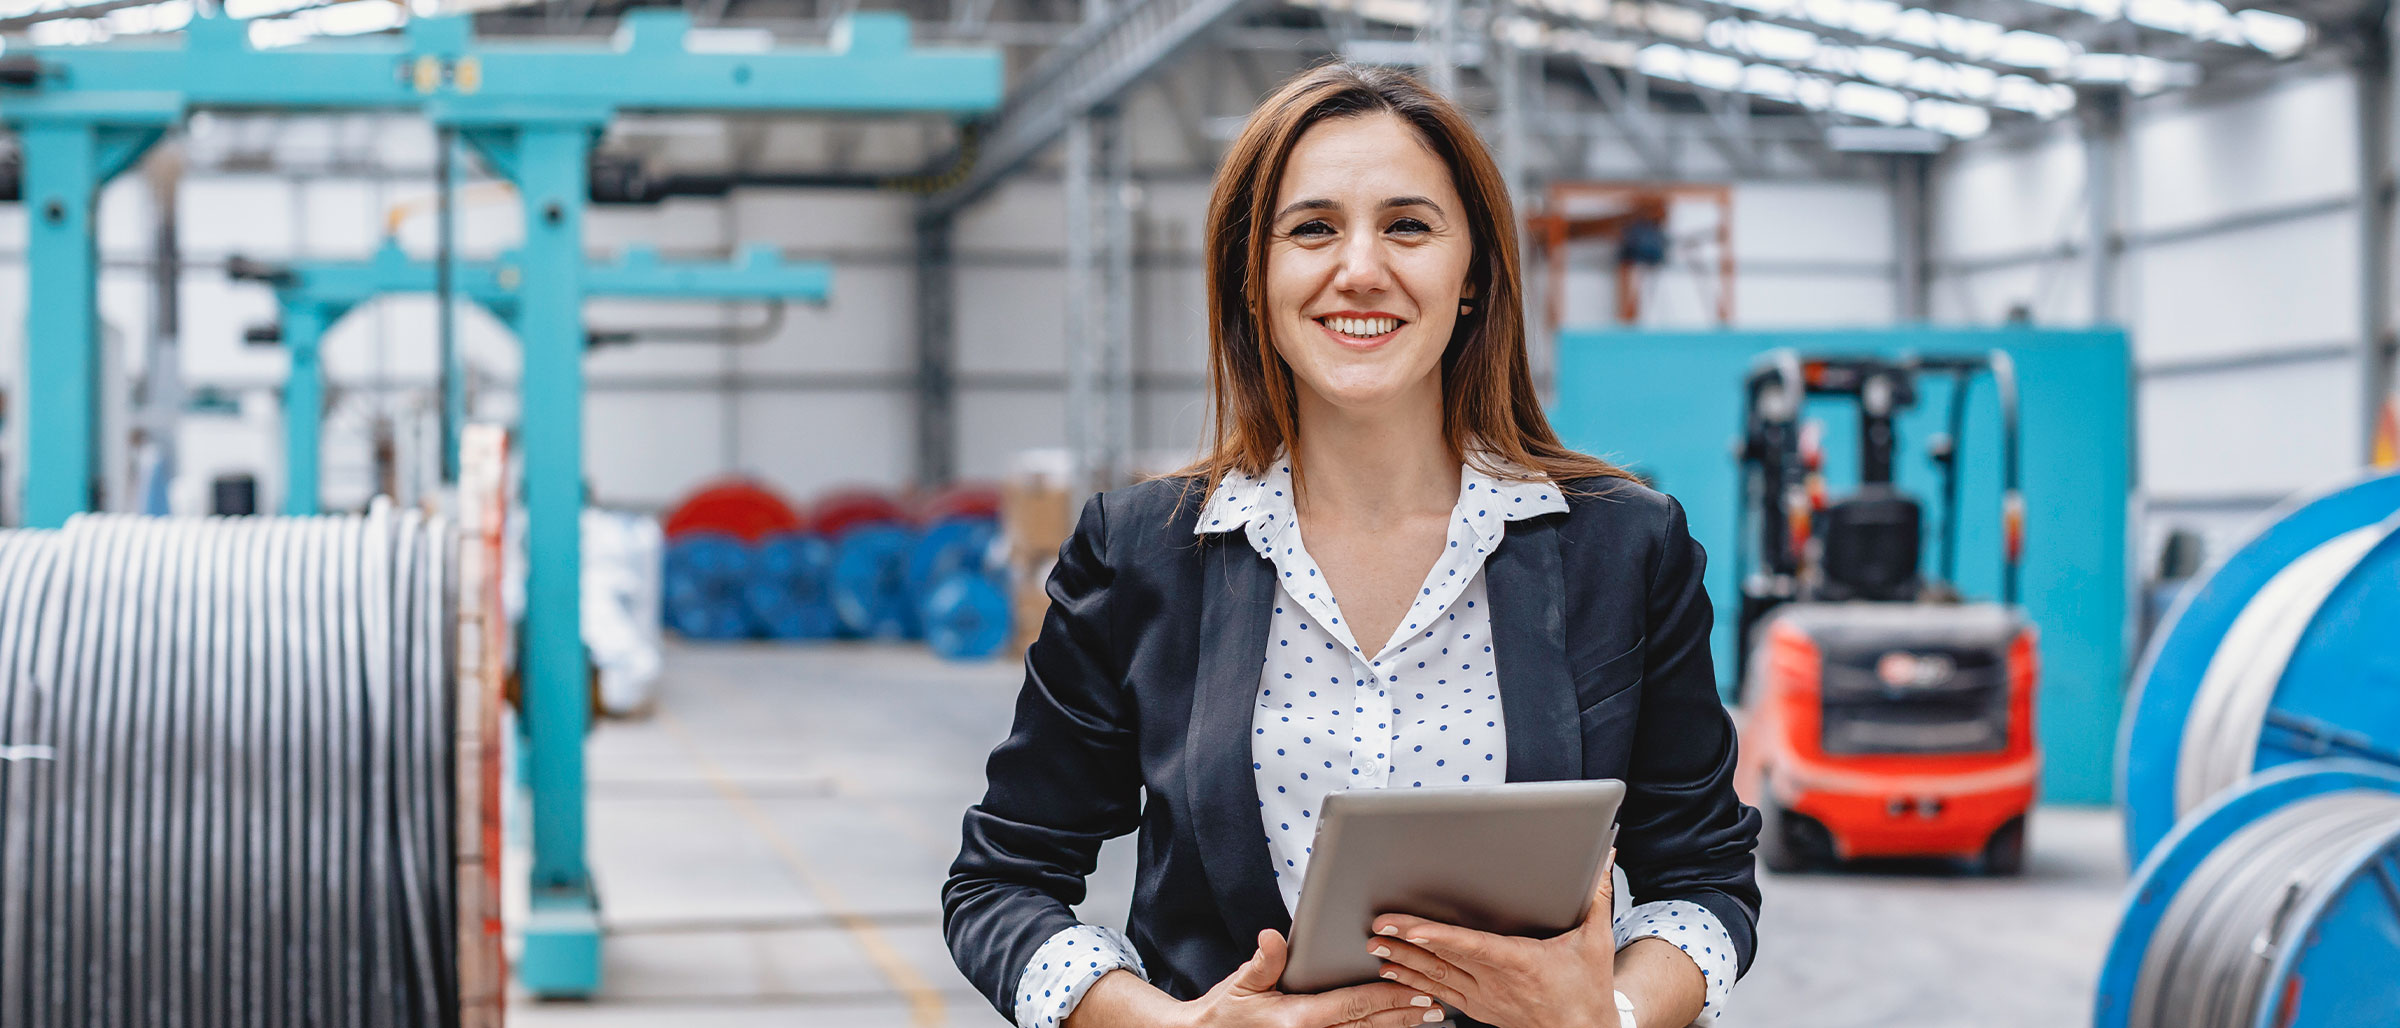 Woman smiling holding tablet in warehouse